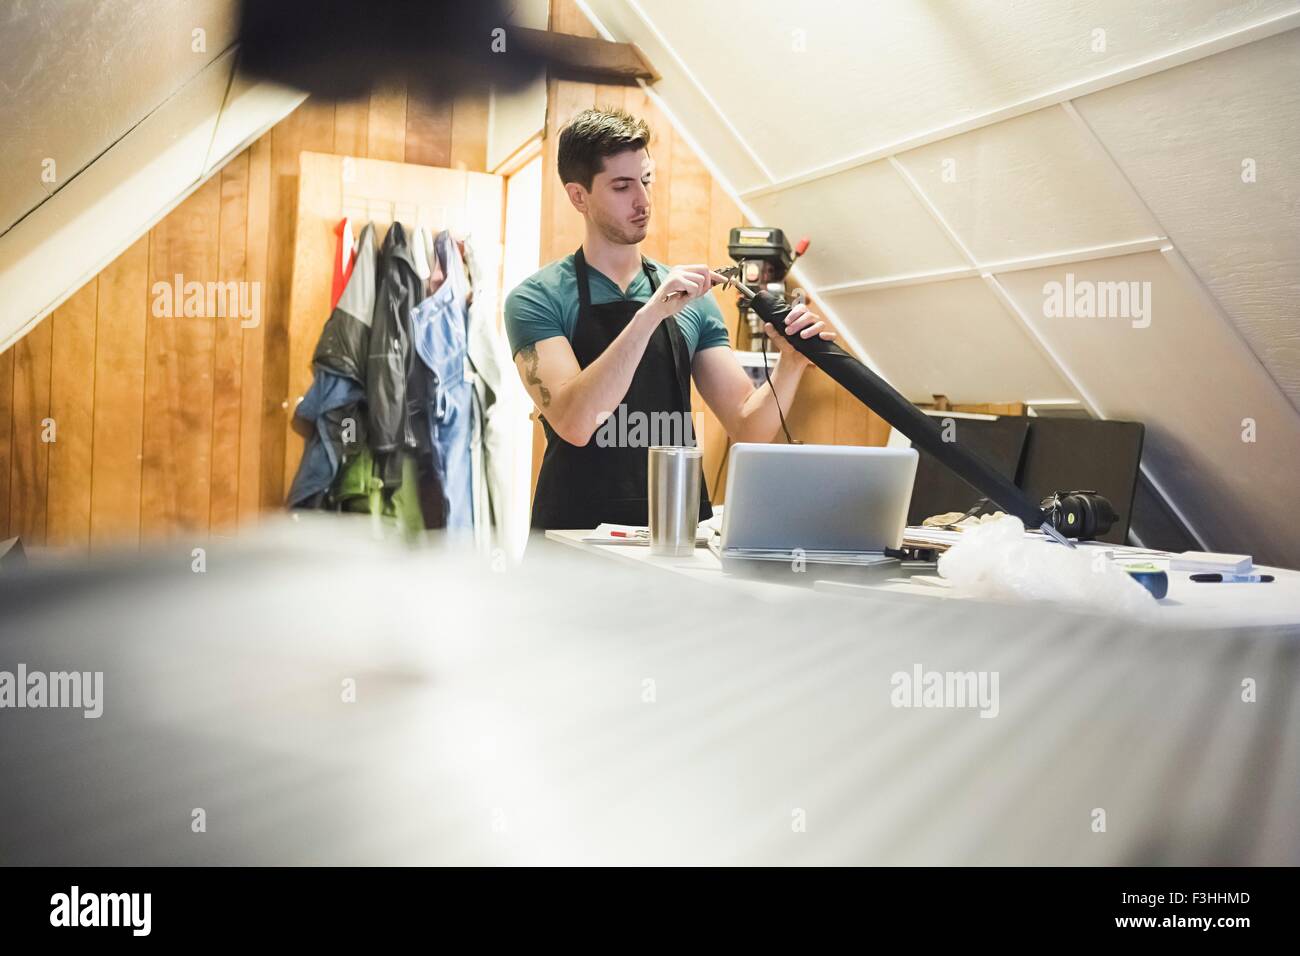 Surface level view of young man in workshop crafting object with tool Stock Photo